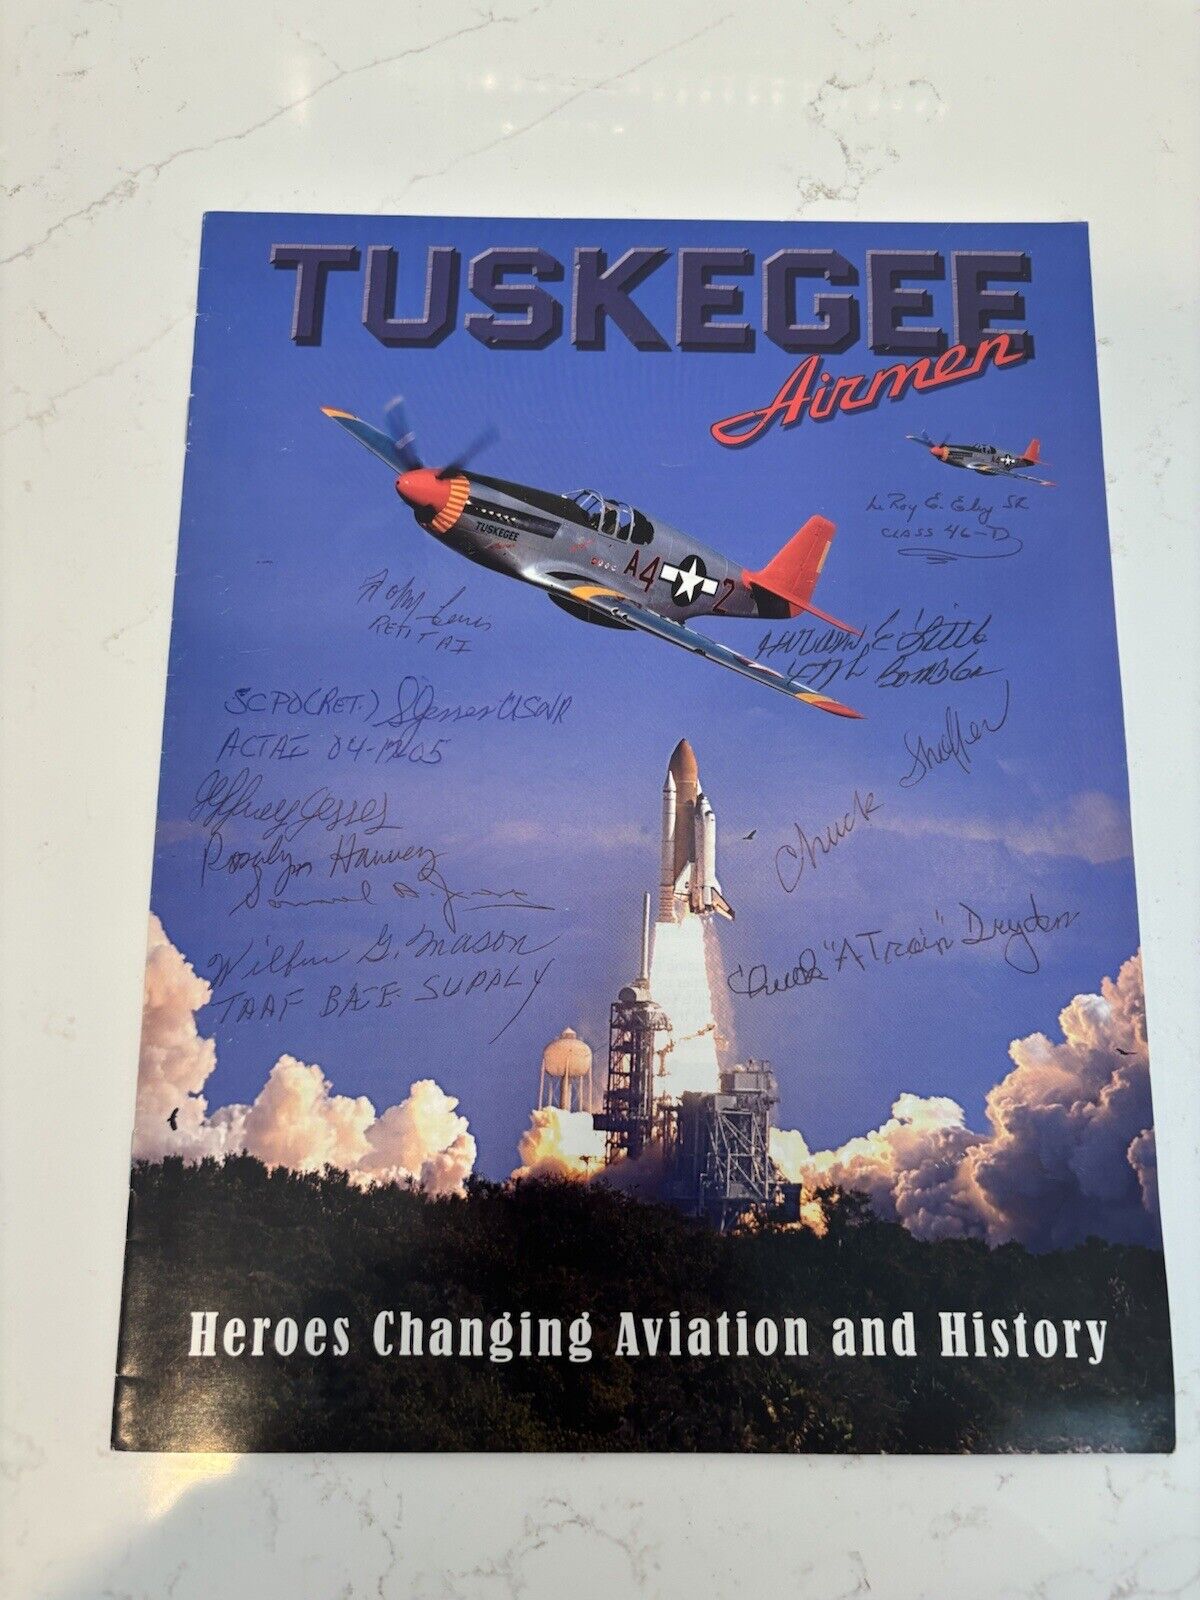 Signed Tuskegee Airmen magazine, Program, Chuck “A-Train” Dryden and More